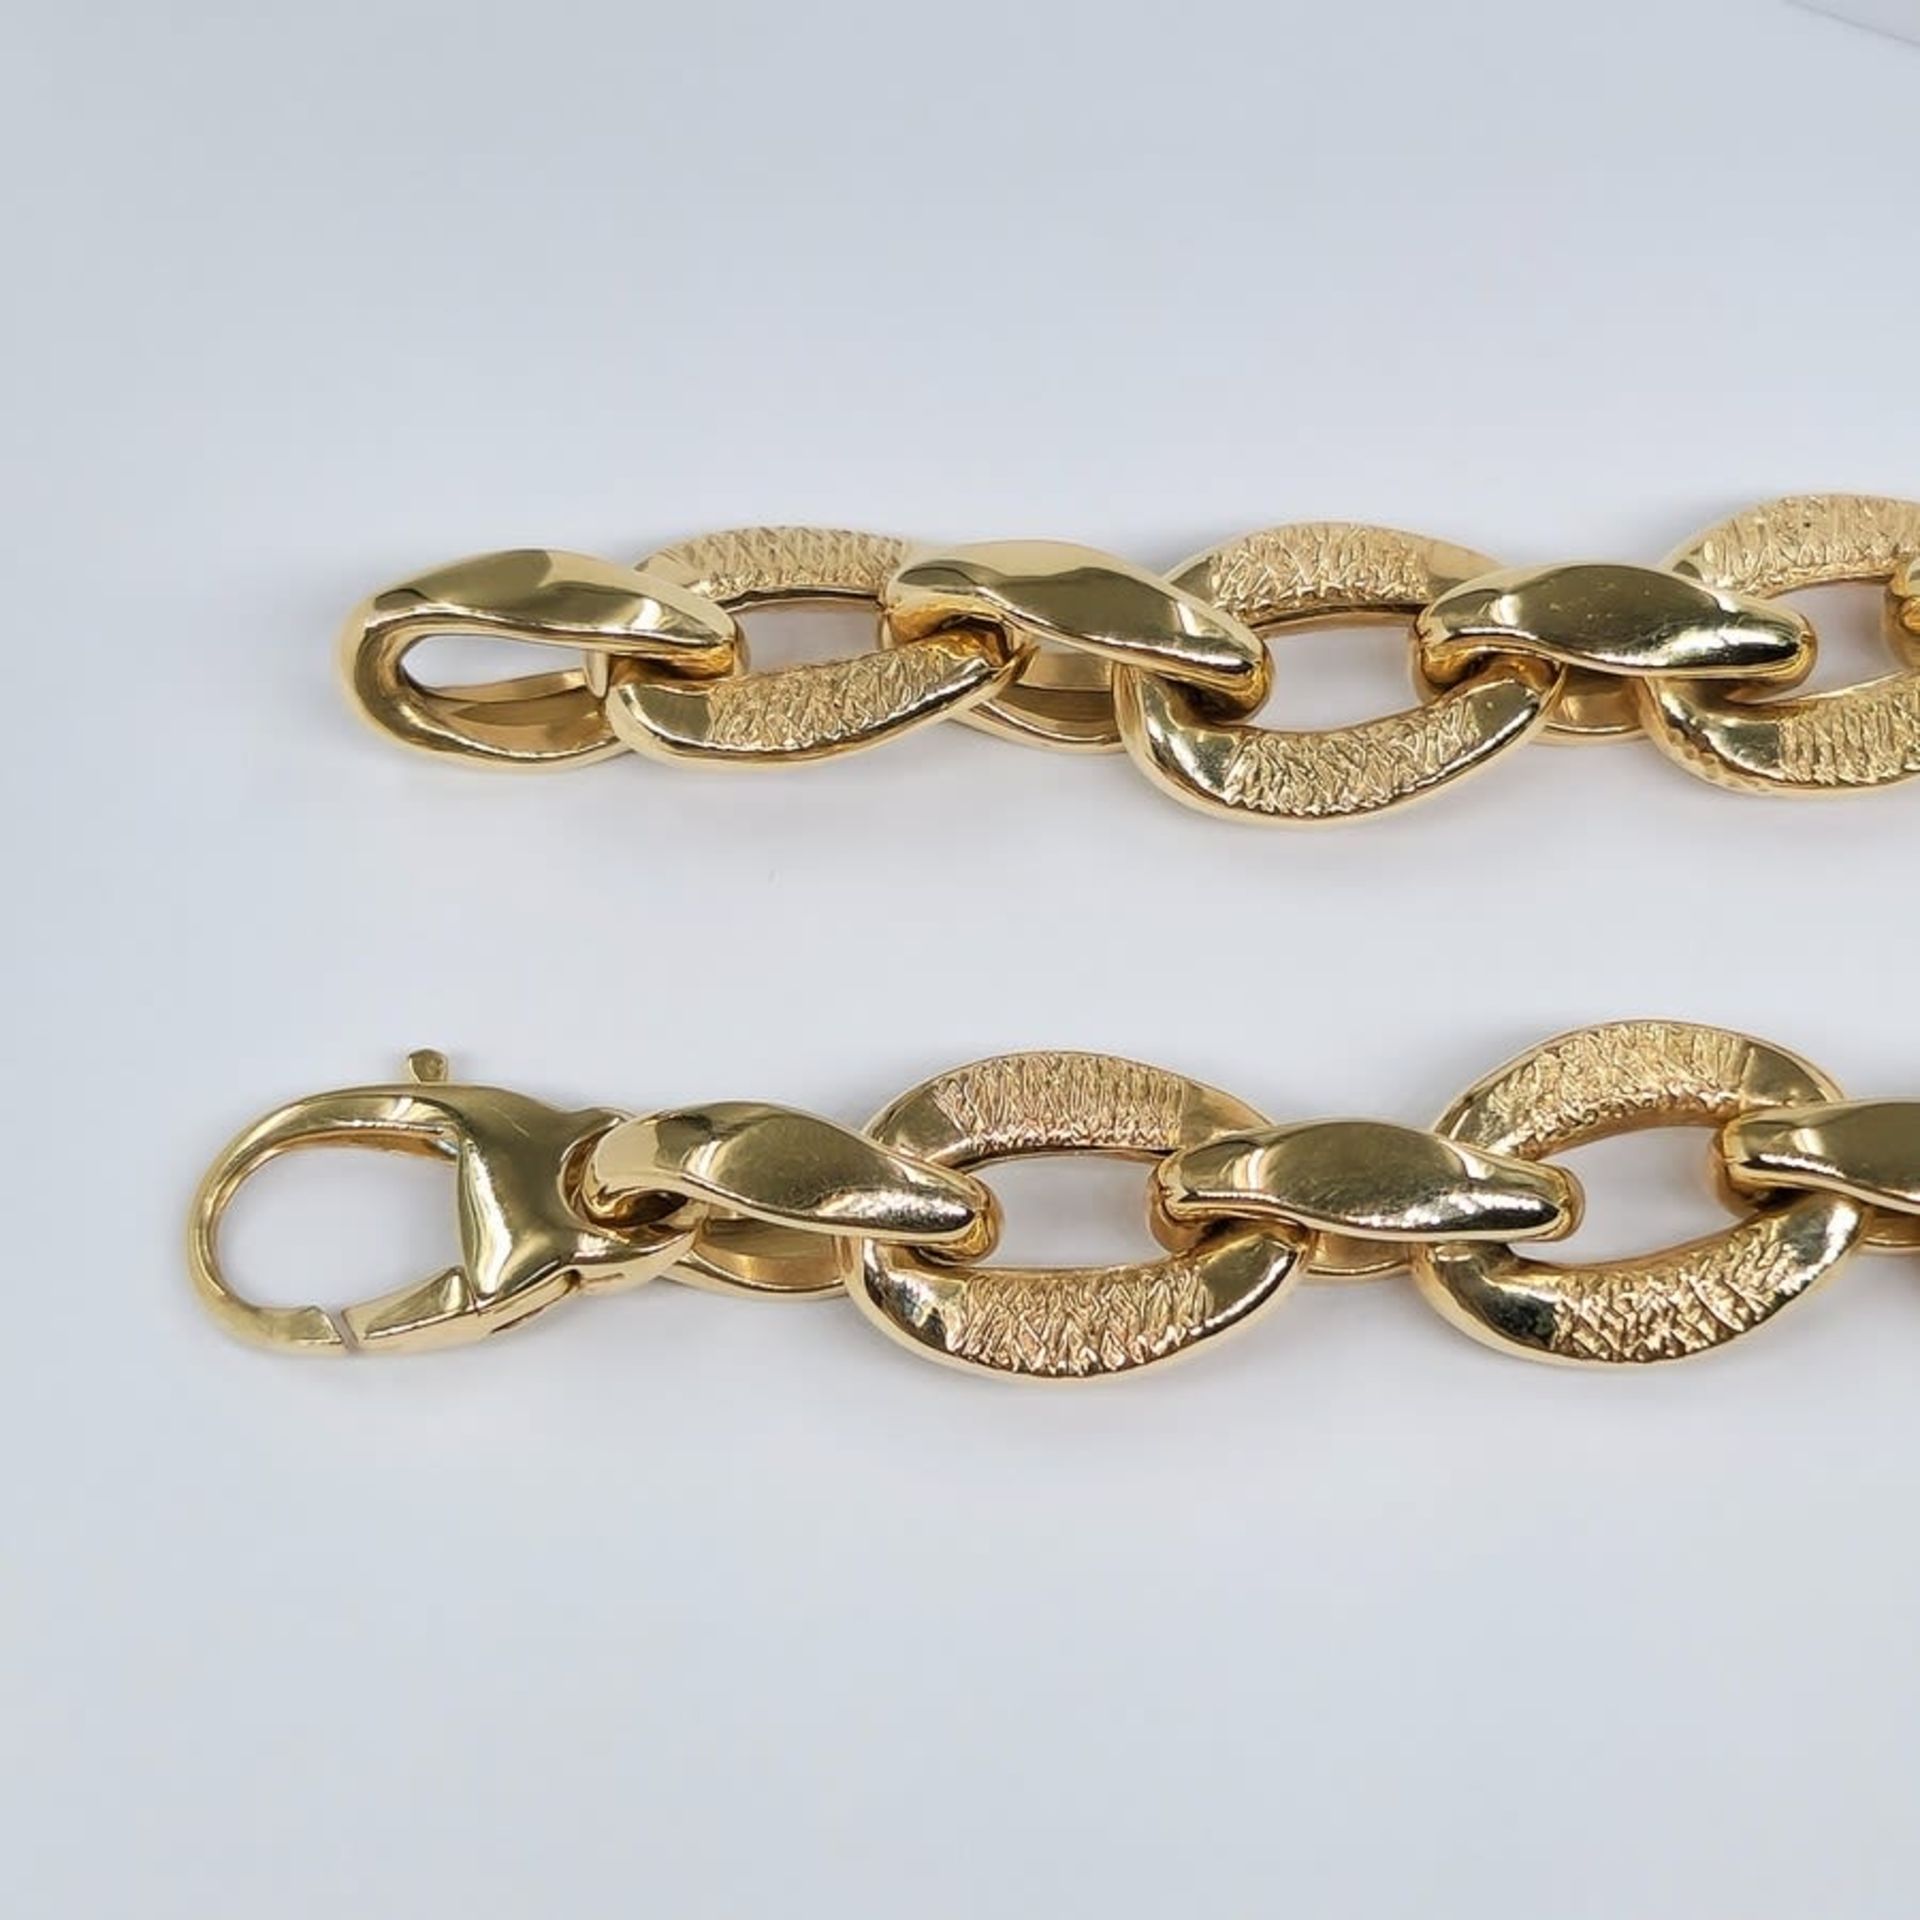 Gold bracelet 14K, signed by the manufacturer and the purity of the gold tested, Weight: 9.66 grams, - Bild 3 aus 4